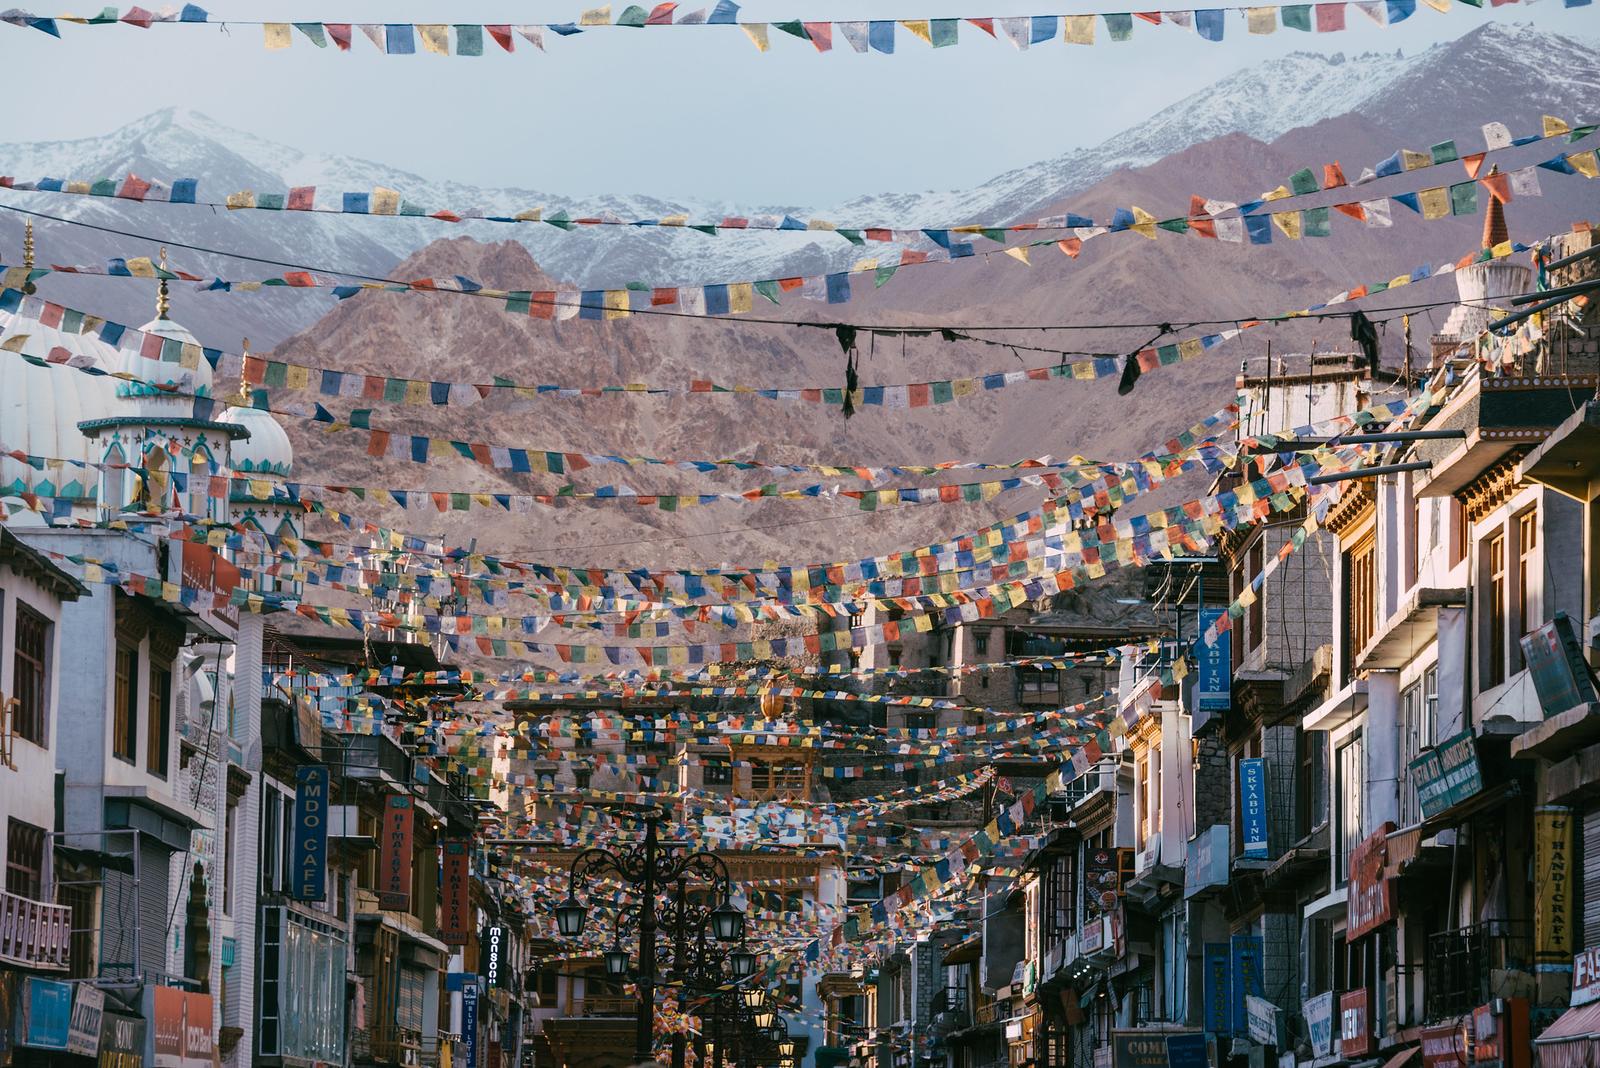 Prayer Flags at the Market